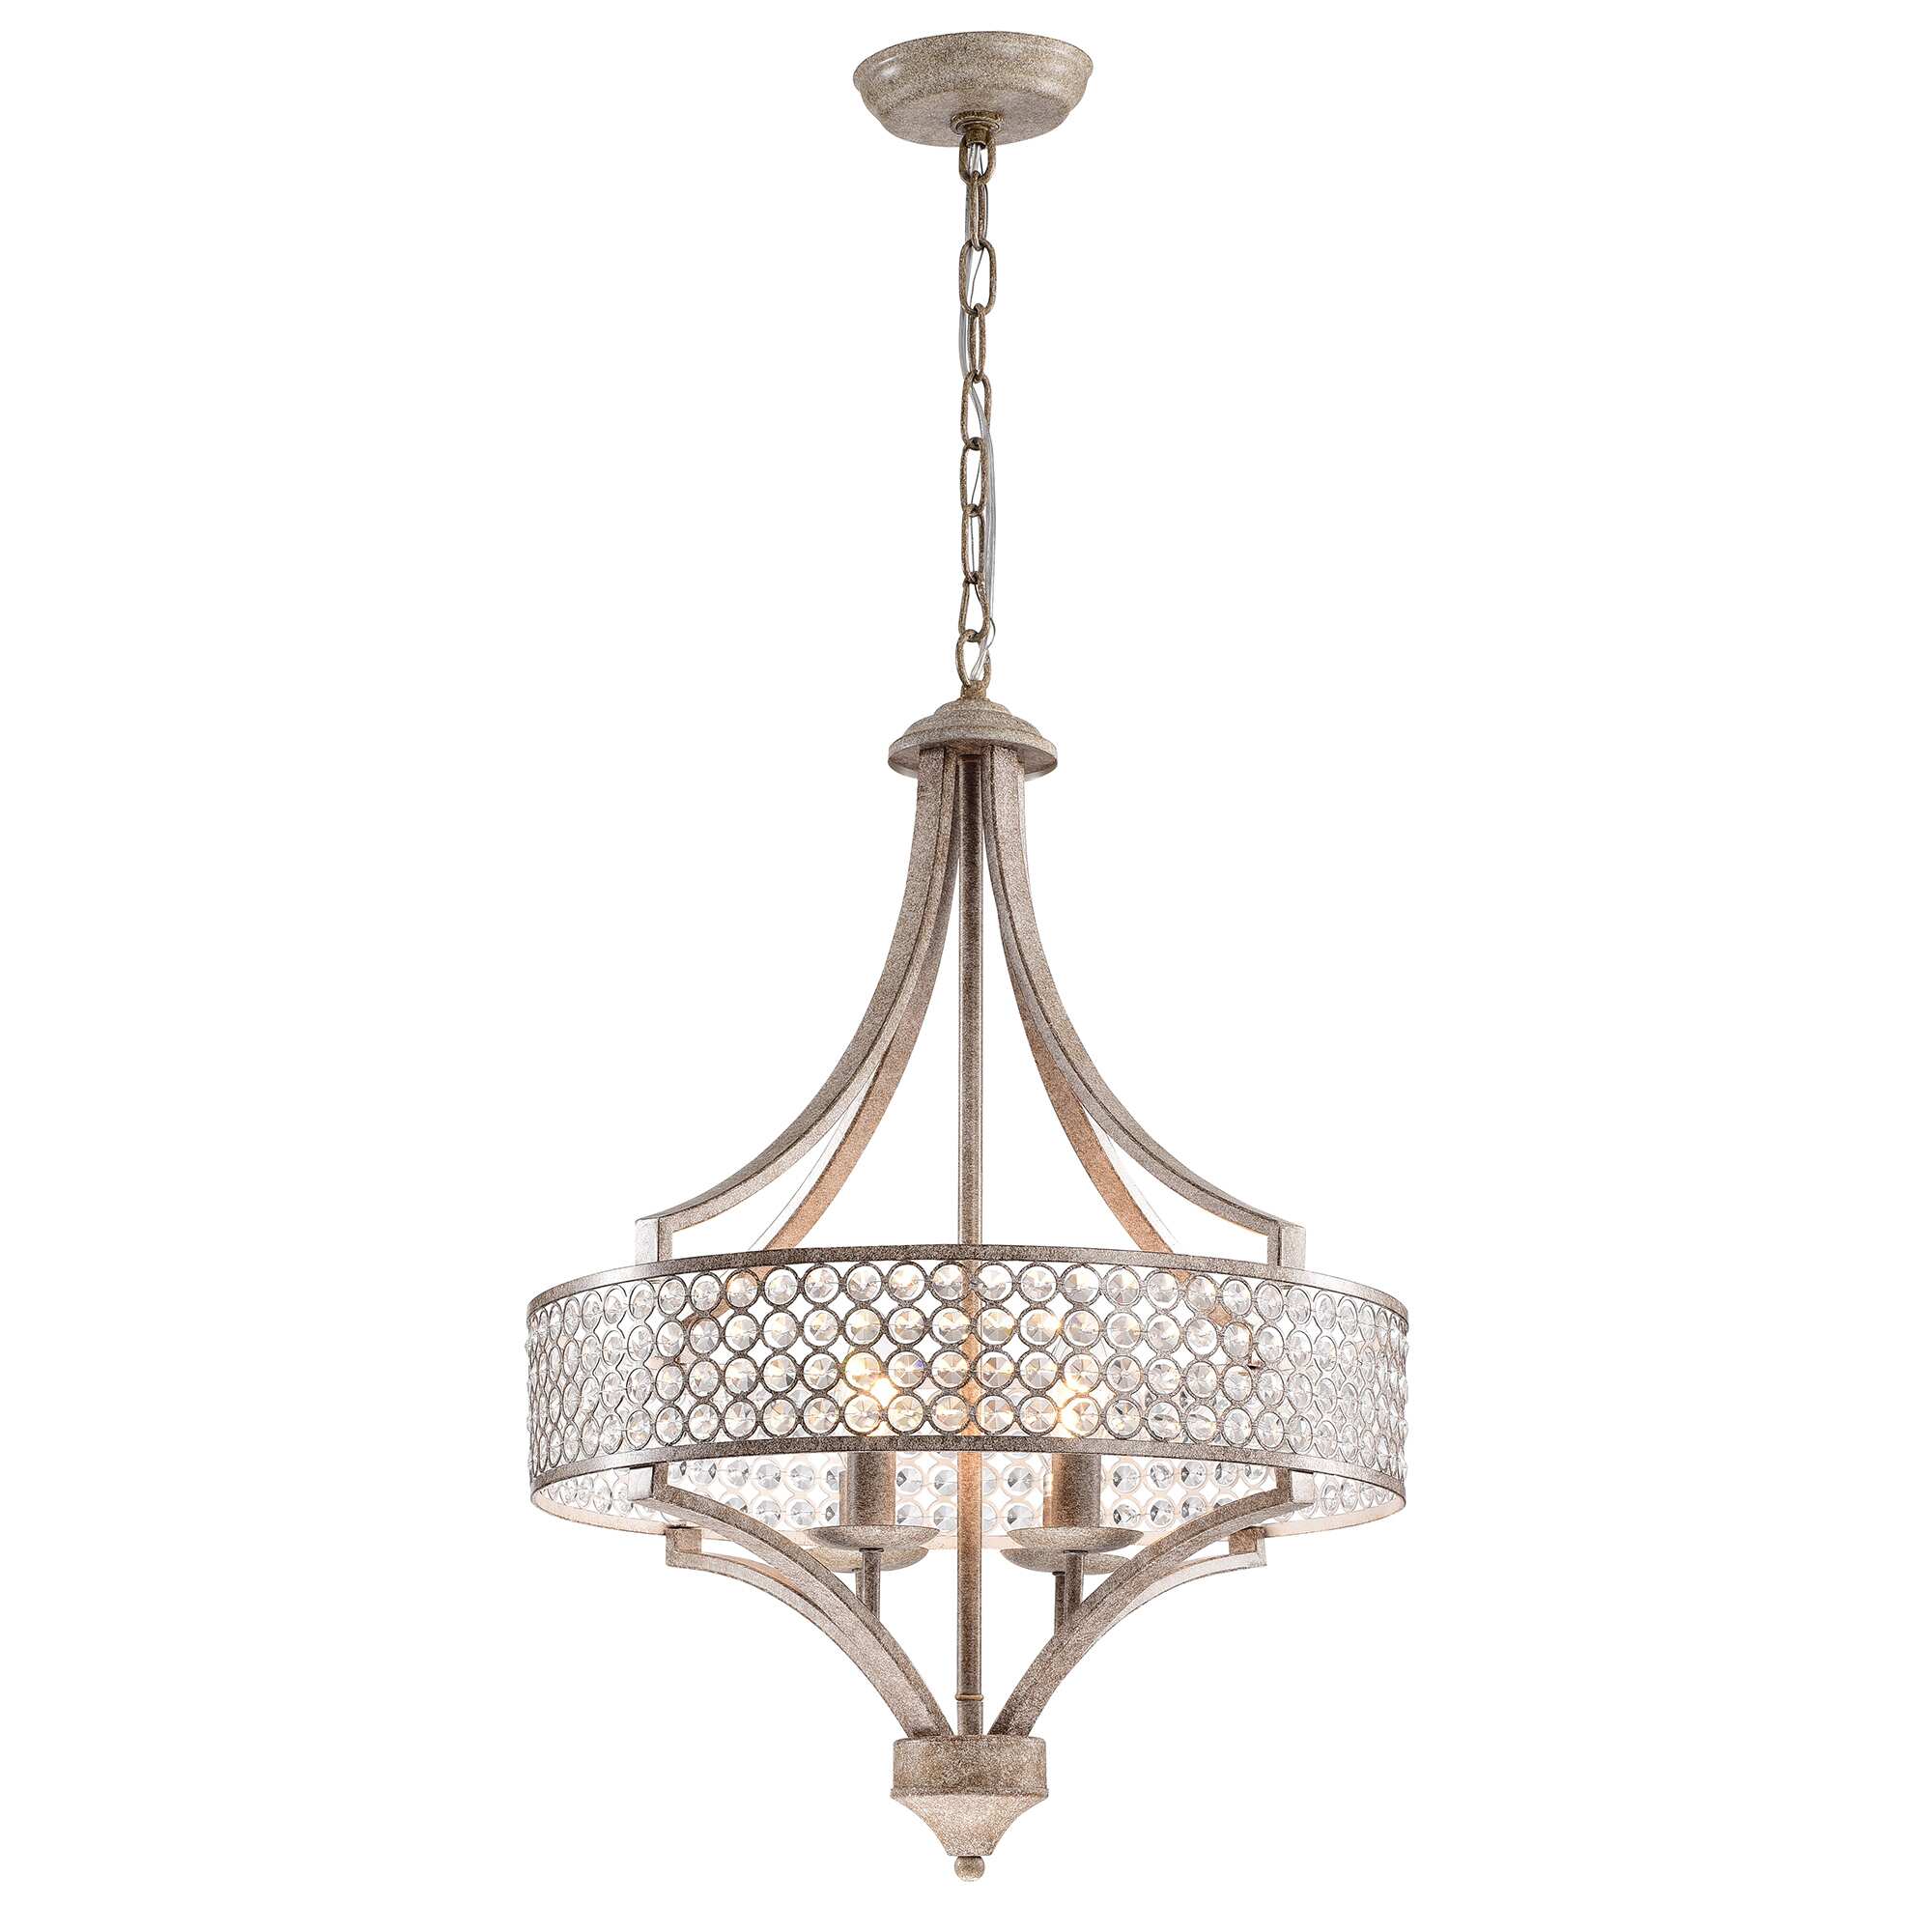 Fleuver Weathered Brown 4-Light Metal Chandelier with Crystal Shade